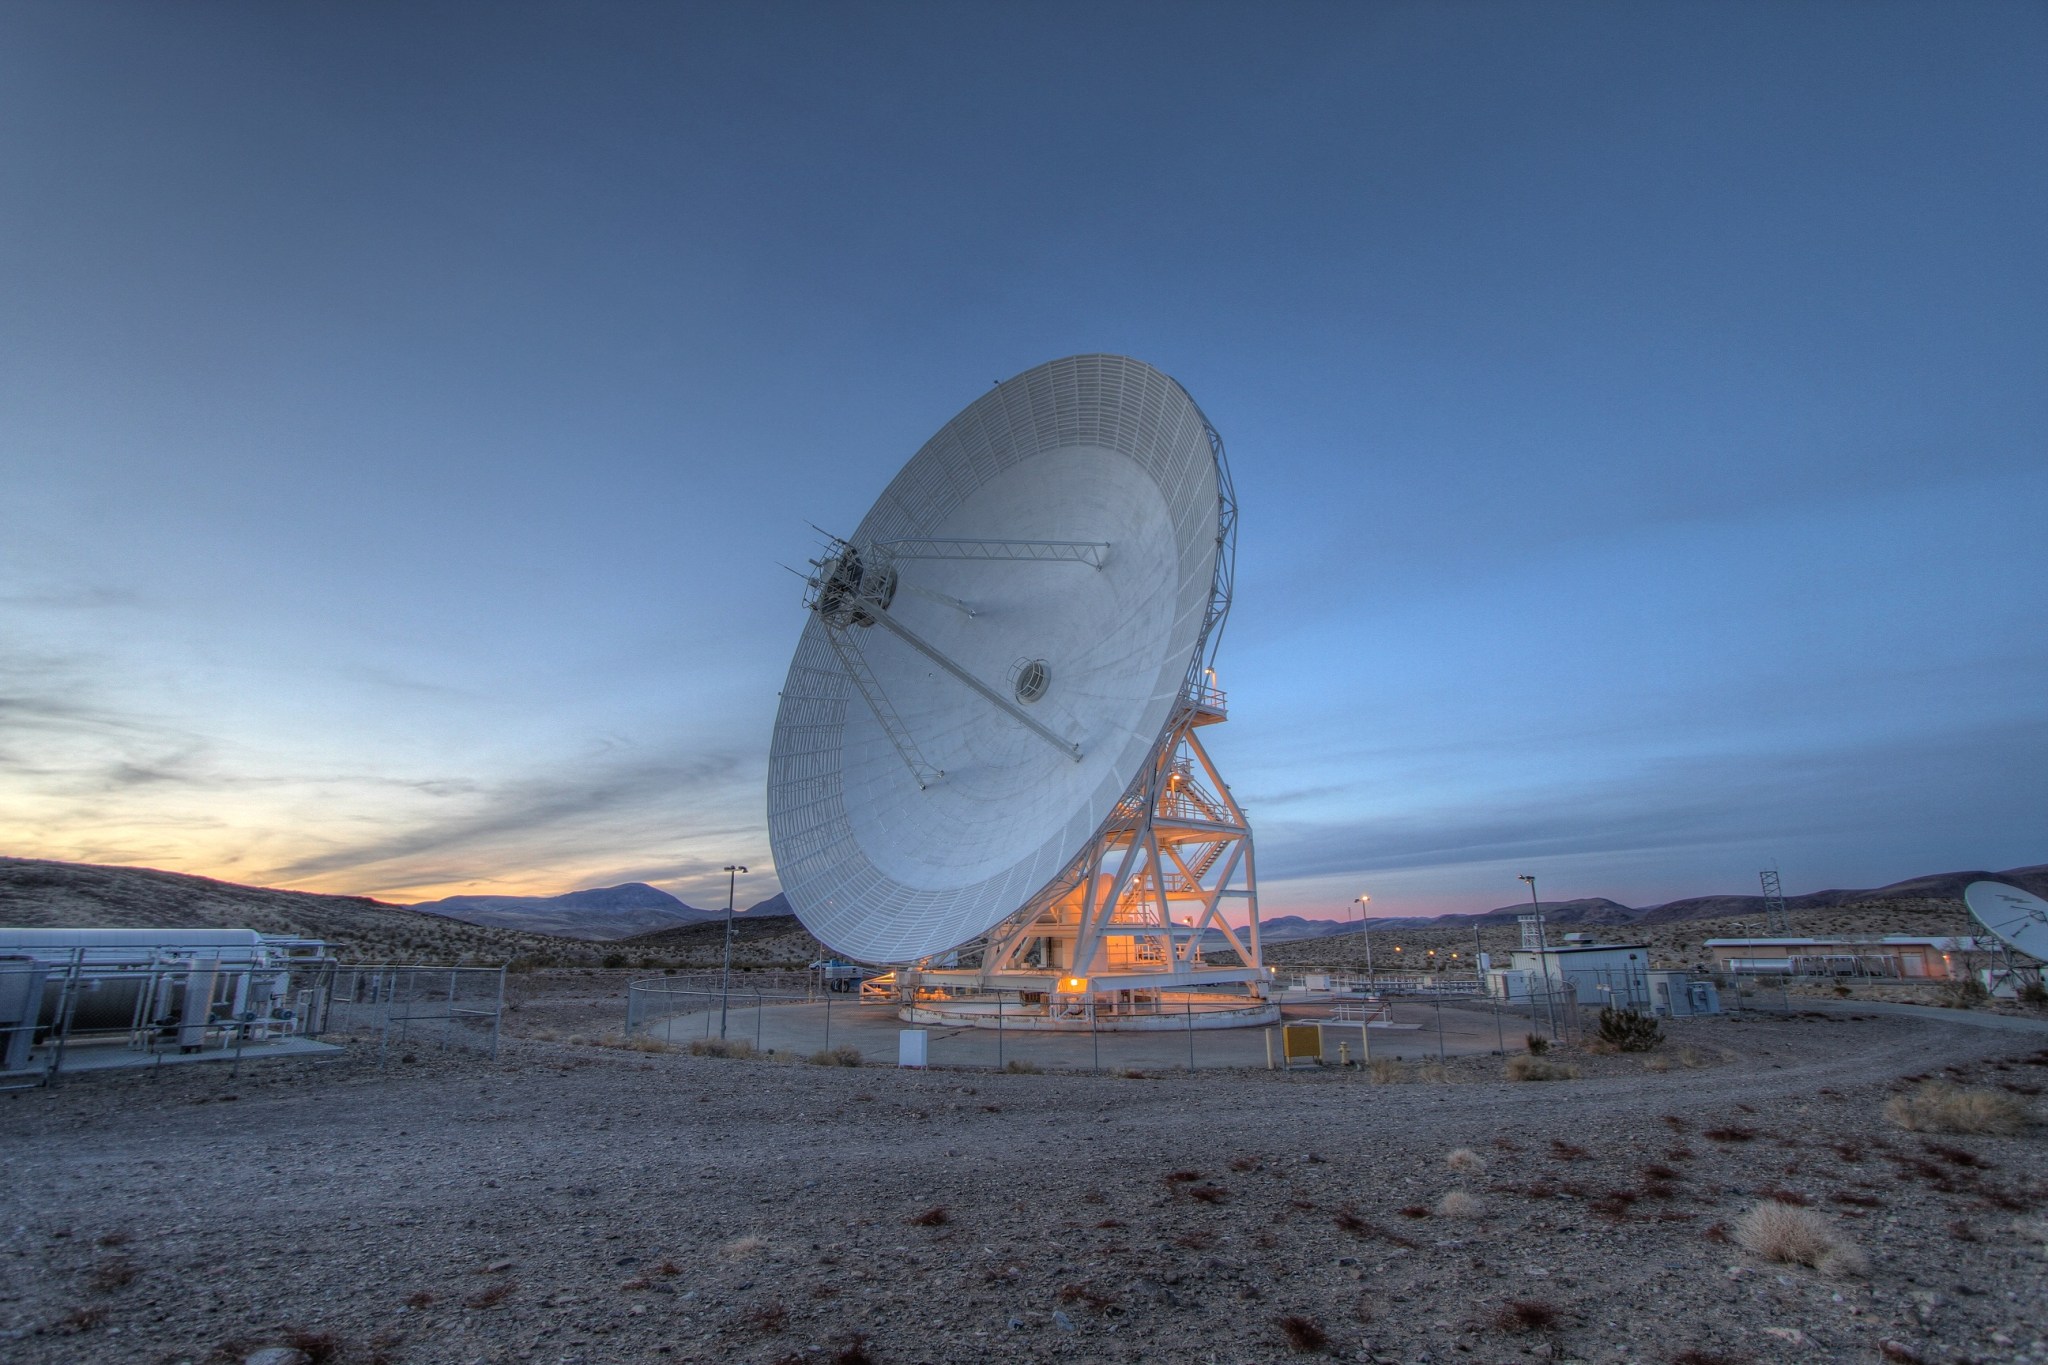 An antenna faces left, surrounded by a rocky landscape, it casts an orange glow in the darkening sky. The Sun peaks behind a mountain range on the left as it sets.